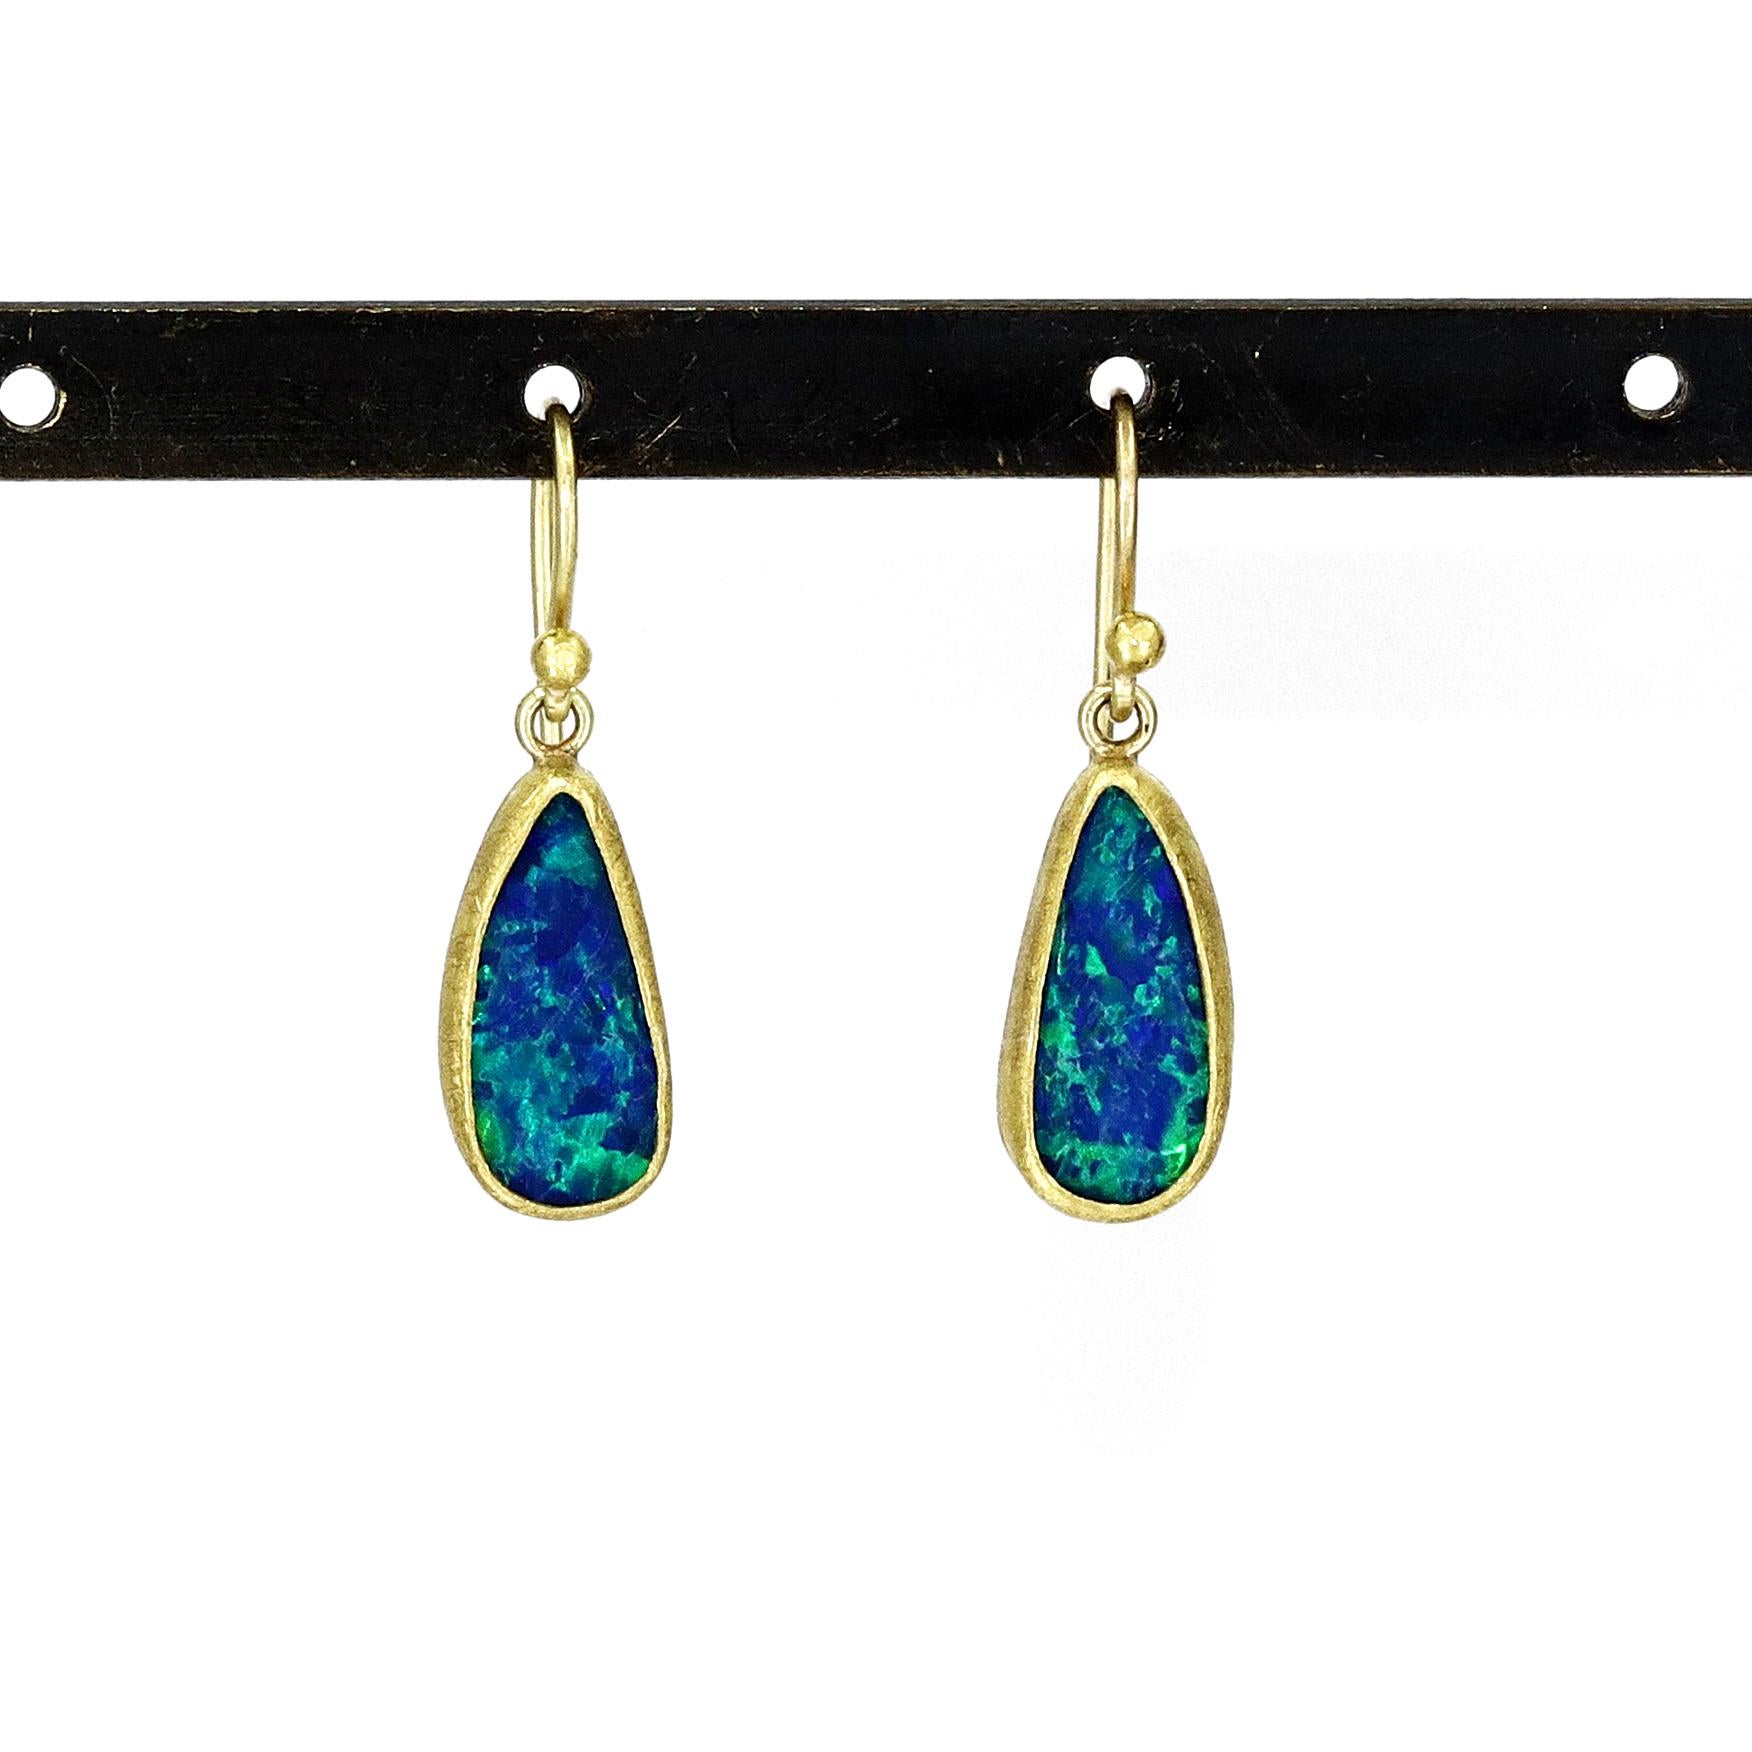 Fire Earrings handcrafted by acclaimed jewelry maker Petra Class featuring two spectacular matched Australian blue opal doublets with electric neon green and blue flash, bezel-set in the artist's signature-finished 22k yellow gold on 18k yellow gold